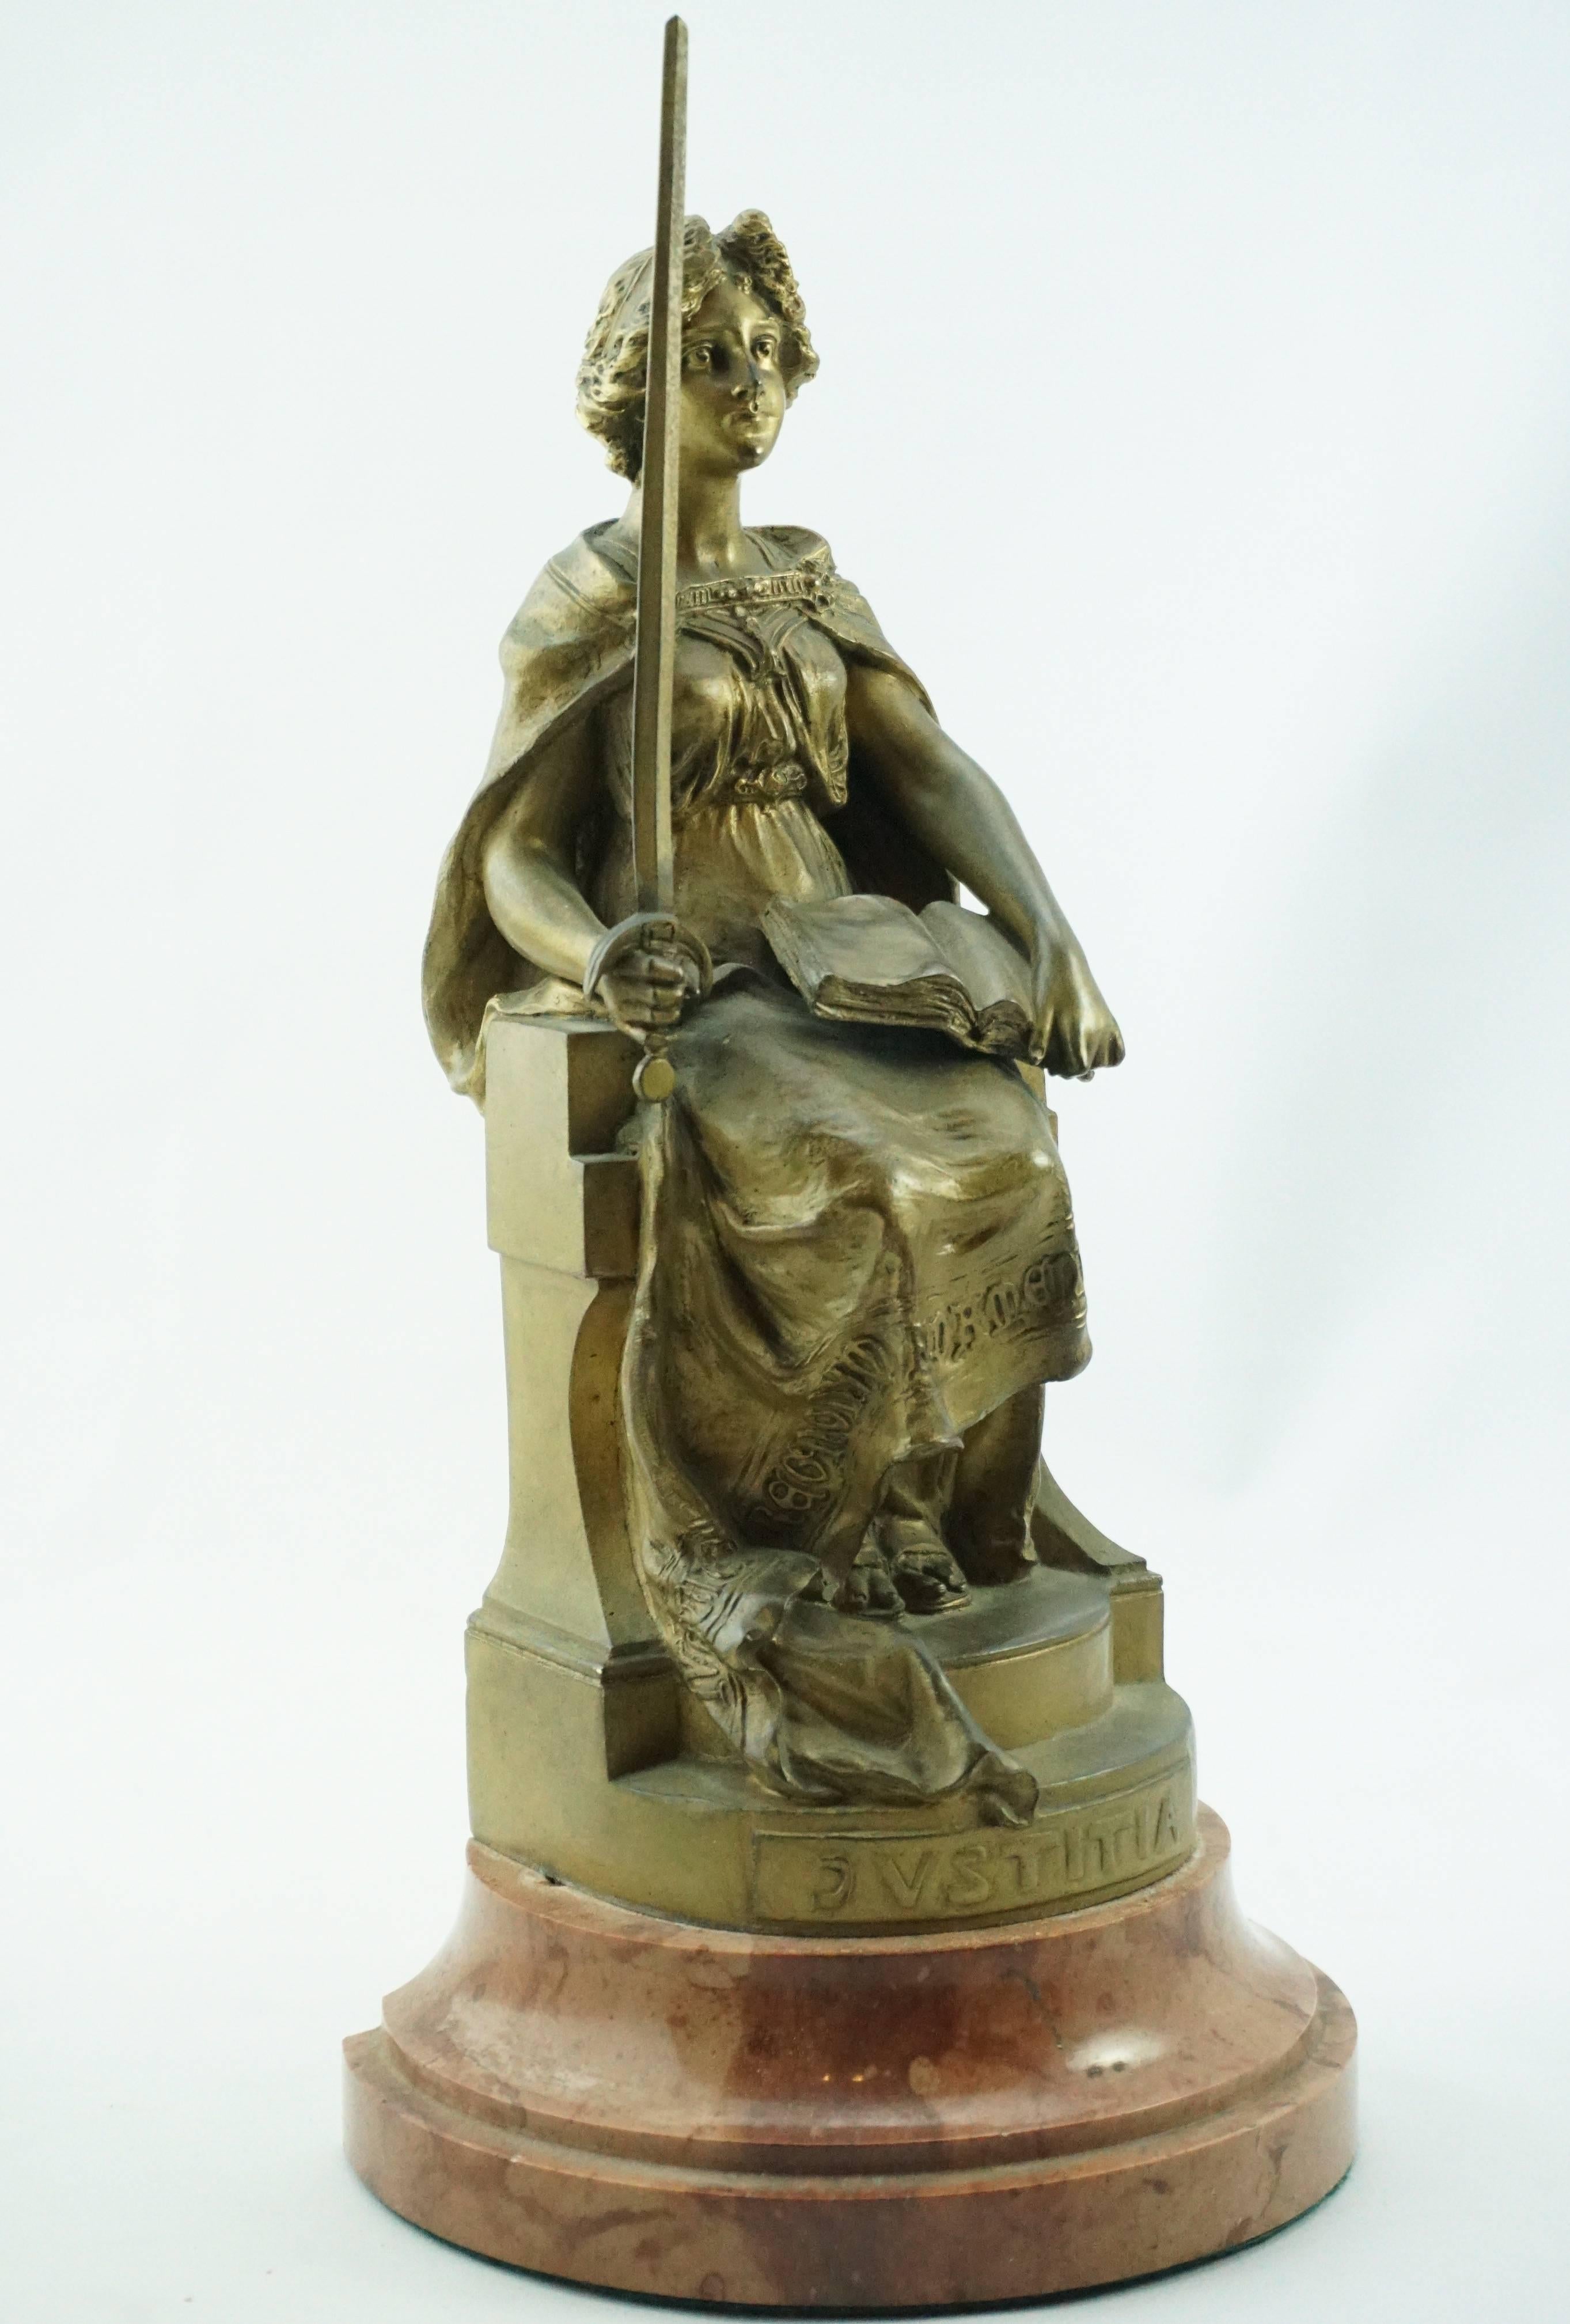 Wonderful and rare original Carl Kauba (1865-1922) gilt bronze of a Lady with sword and law book titled 